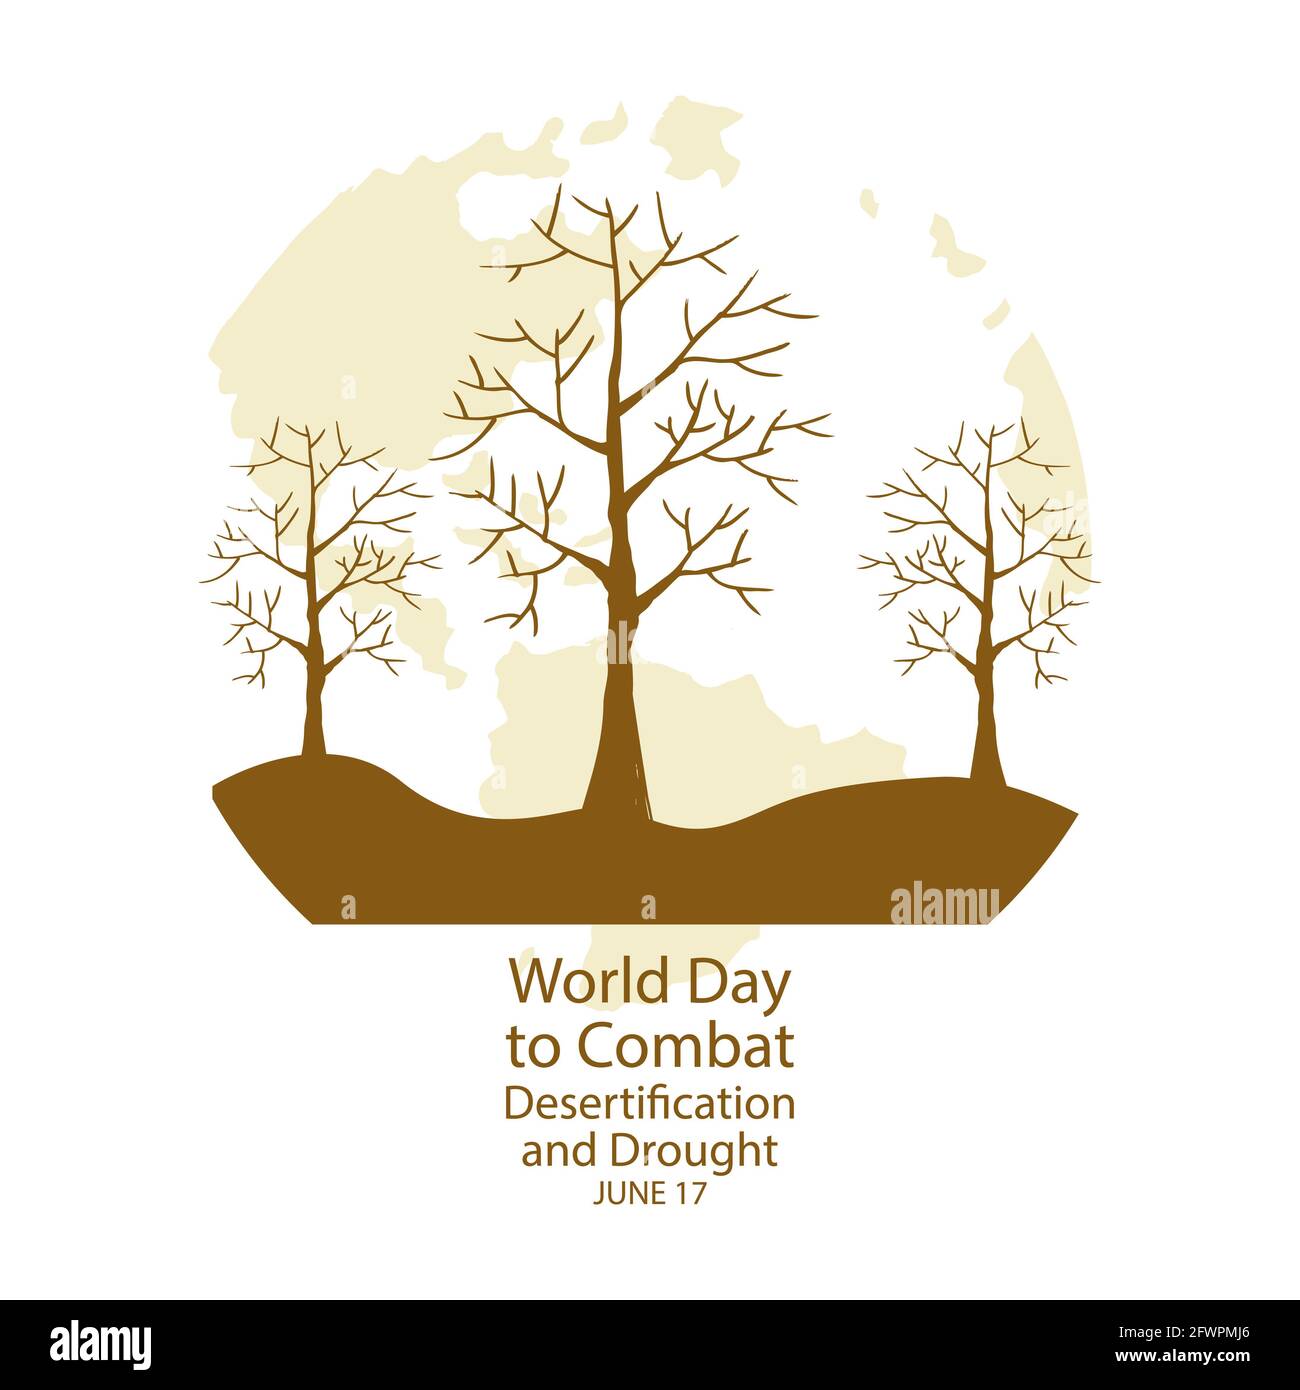 World Day to Combat Desertification and Drought. Poster concept. Stock Photo